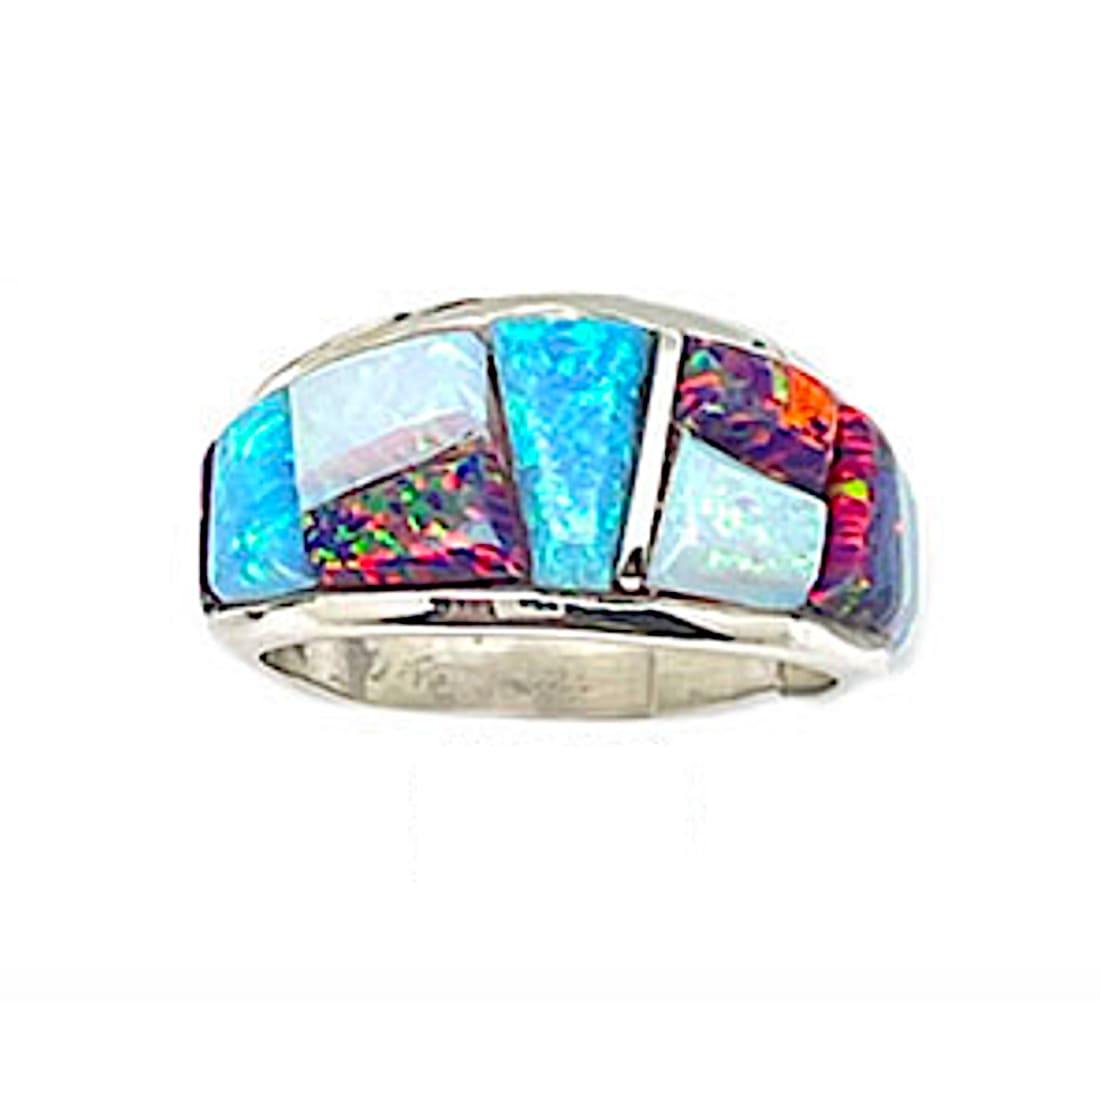 Navajo Multi Opal Cobble Inlay Ring Sz 7.5 Sterling Silver